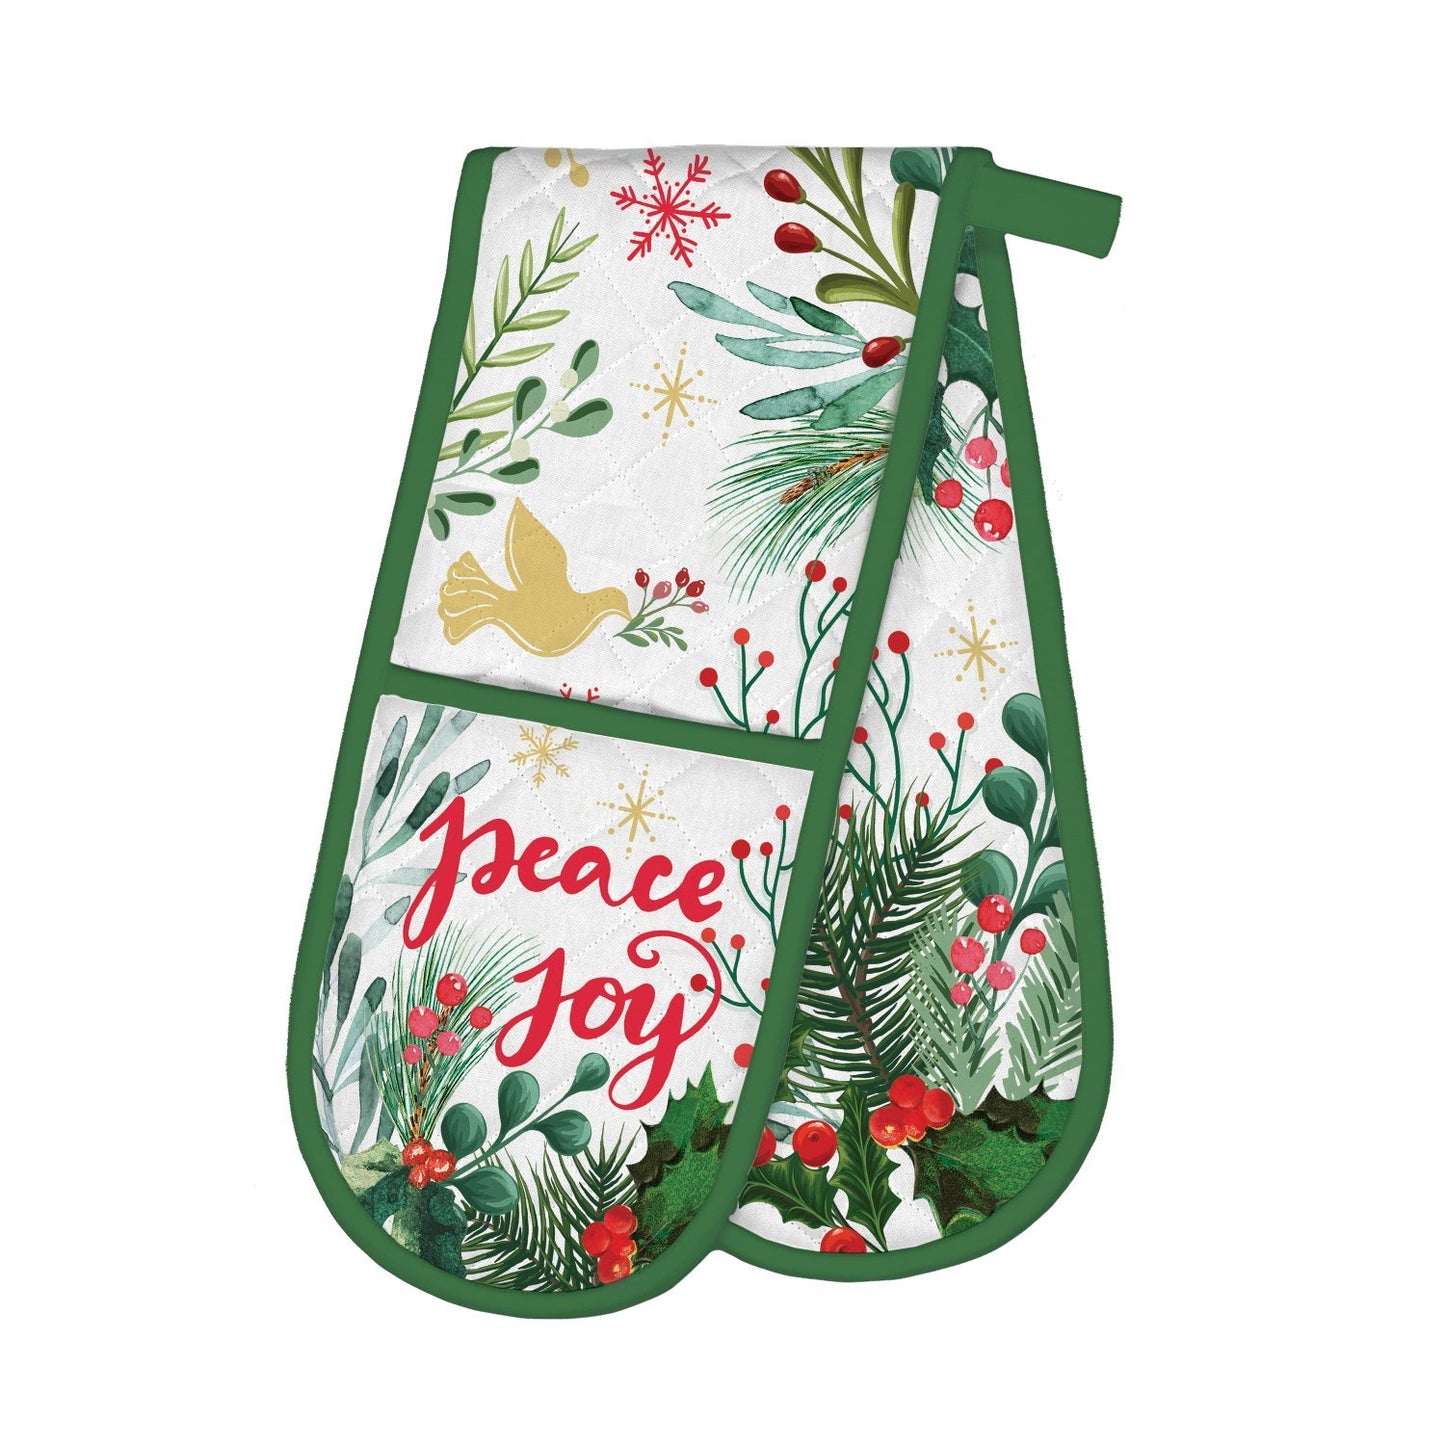 Joy to the World Double Oven Glove - Festive and Protective Holiday Kitchen Essential